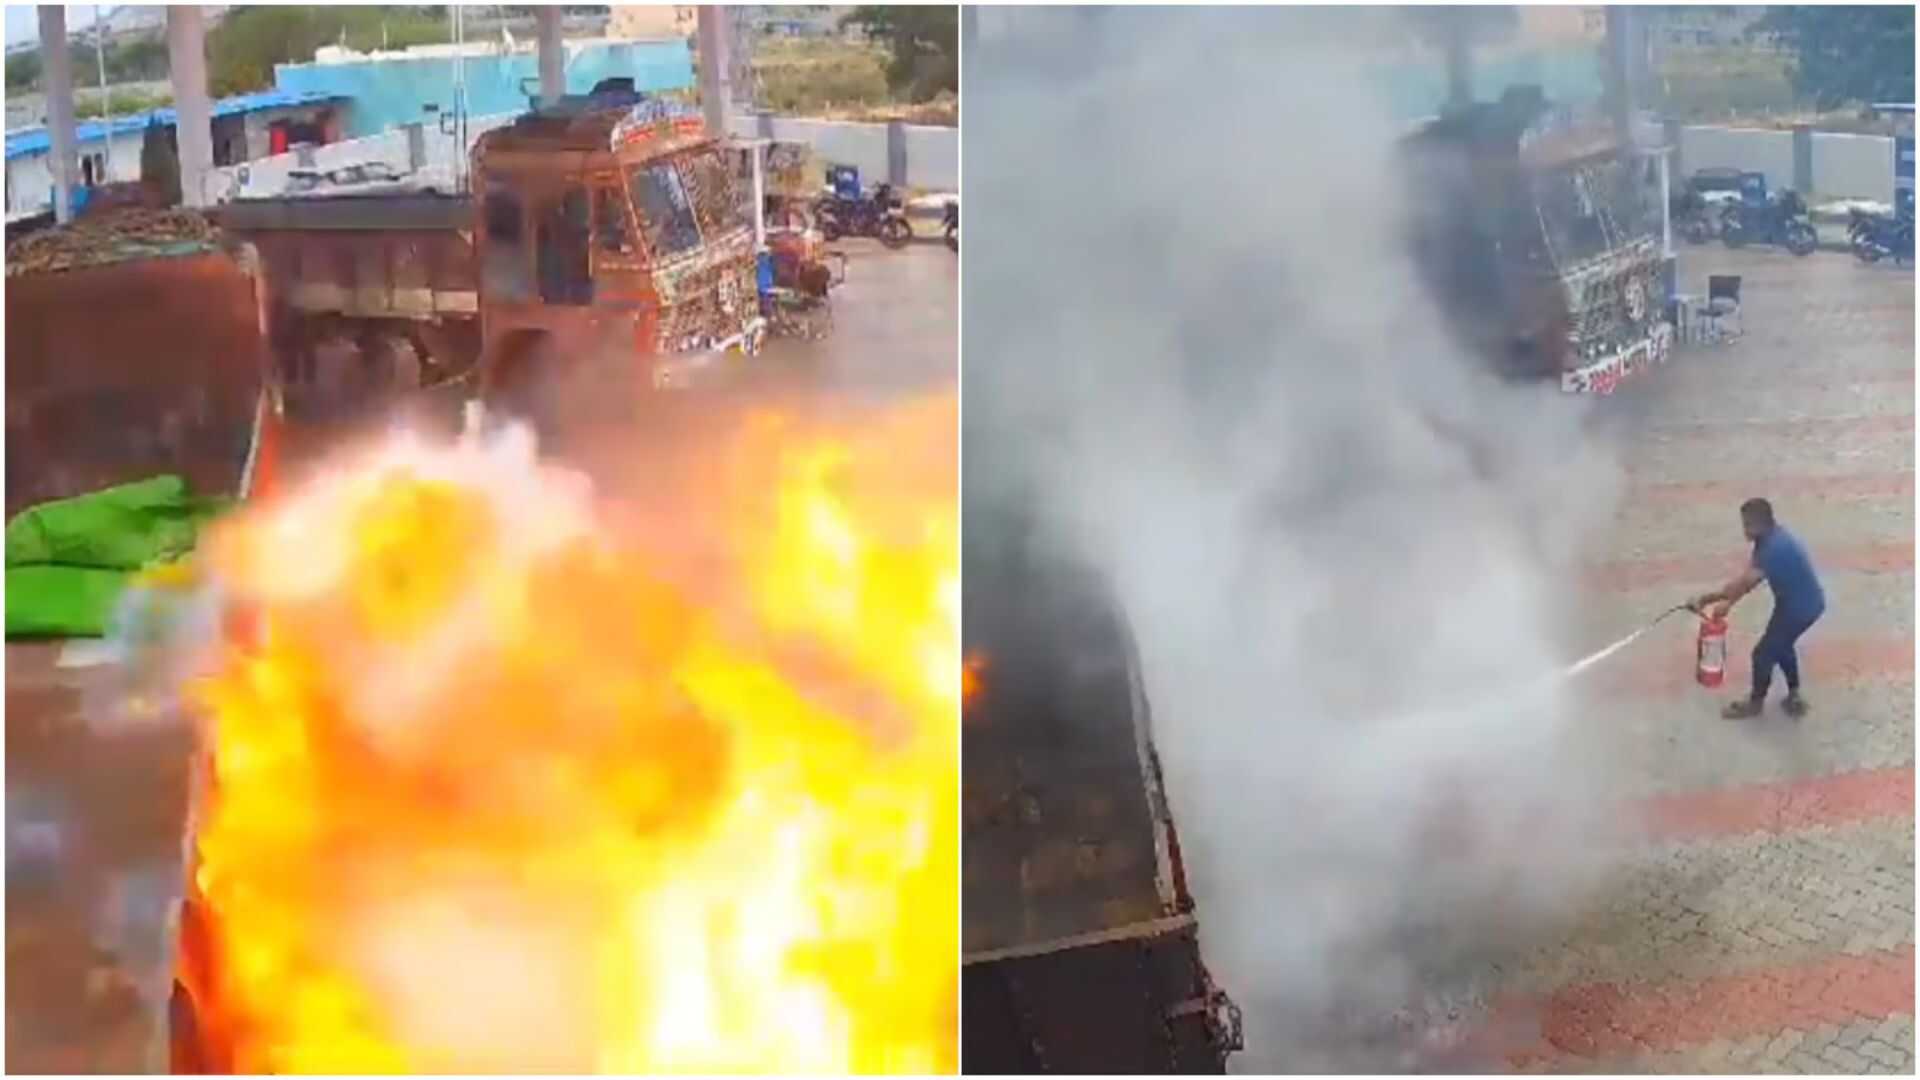 Telangana: Fire Breaks Out At Gas Station, No Injuries